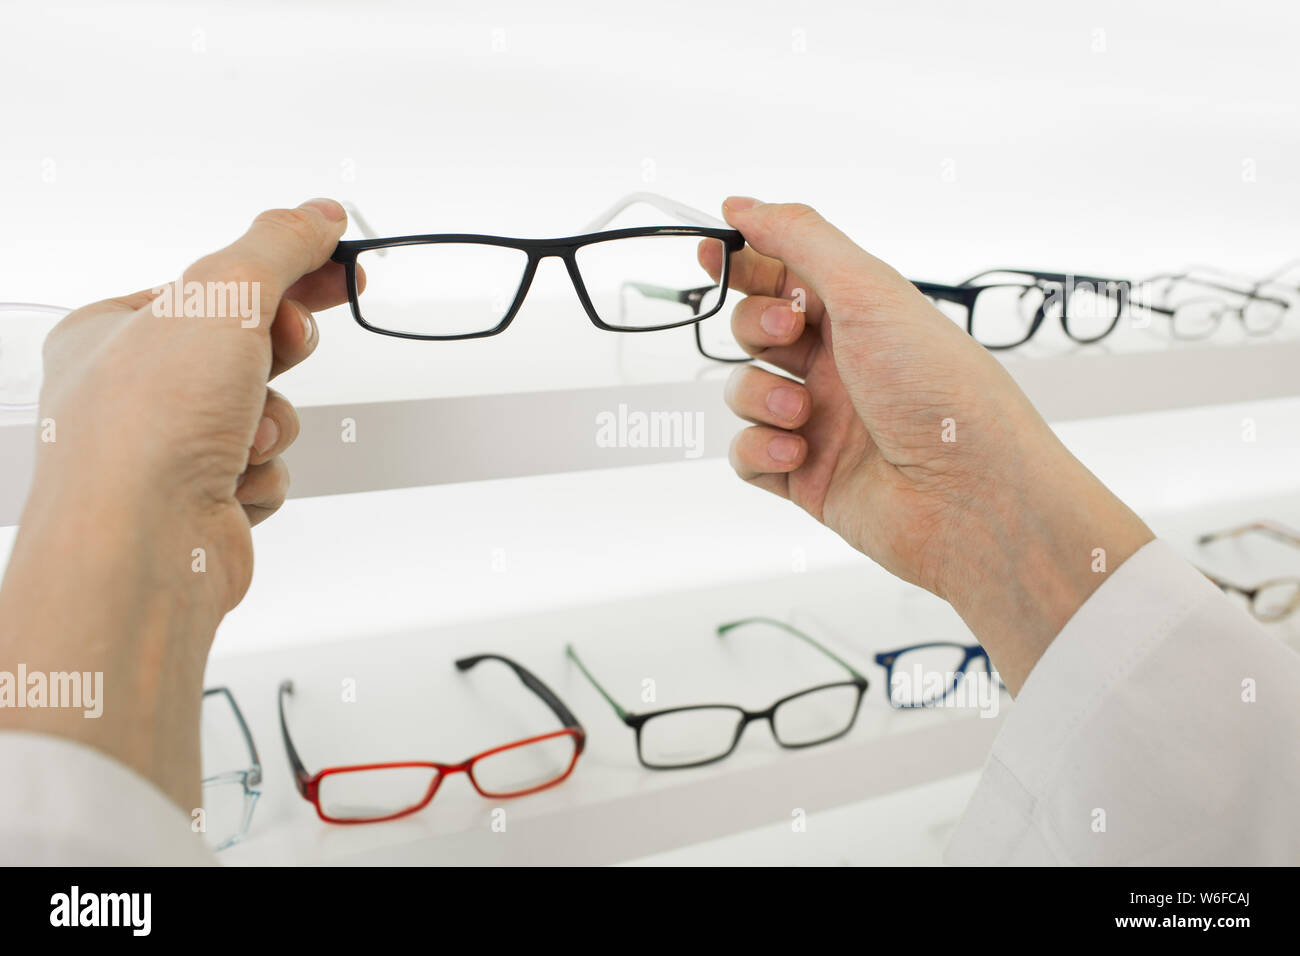 doctor's hands and glasses, close-up Stock Photo